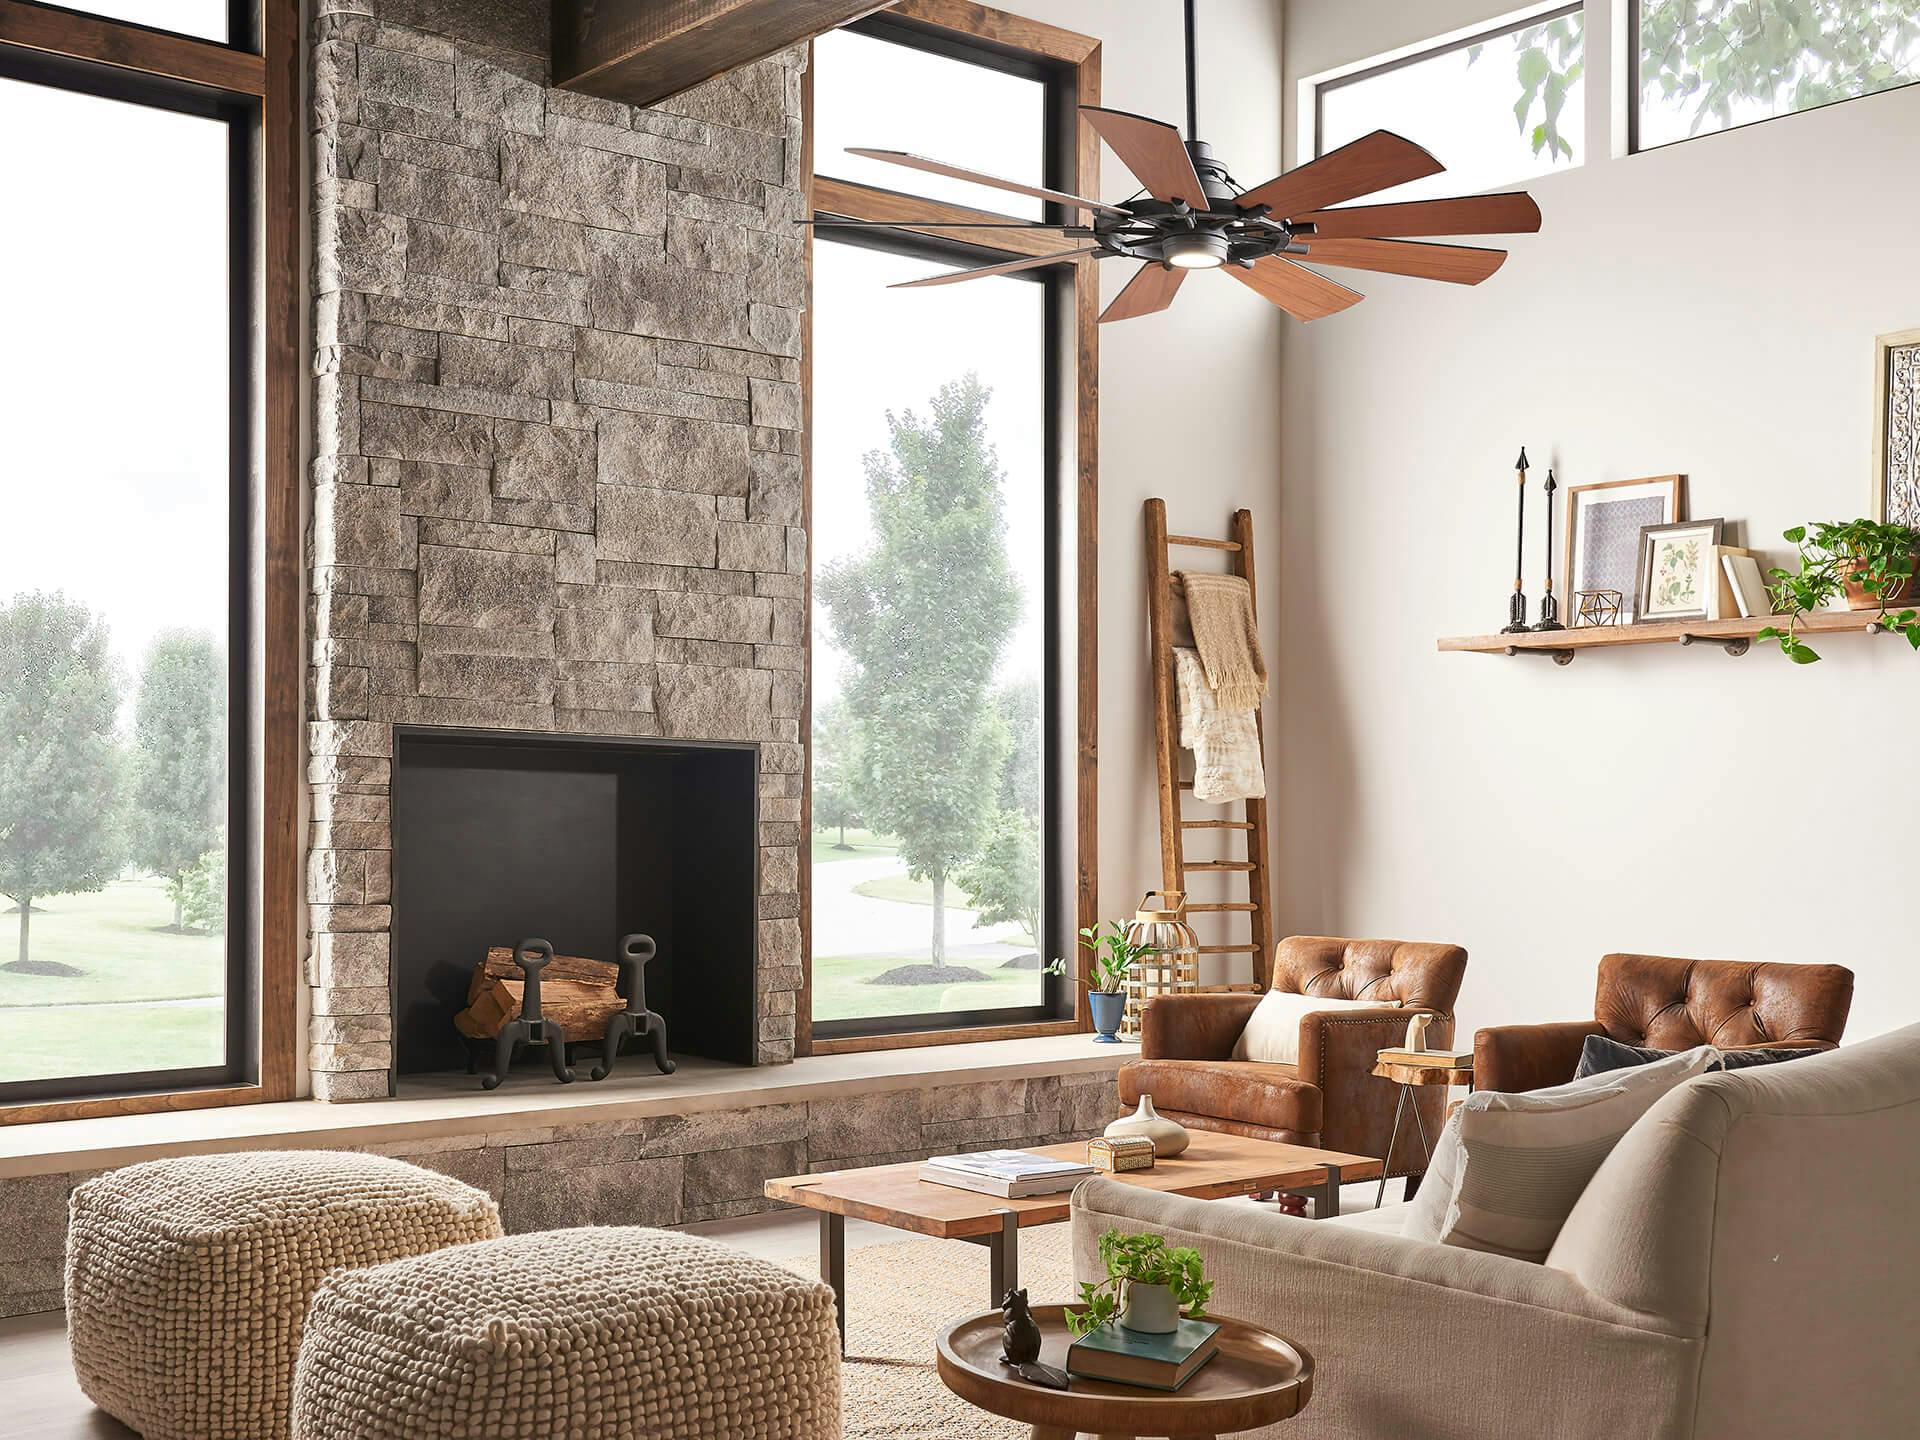 Living room with floor to ceiling windows and large stone fireplace, featuring a Gentry ceiling fan